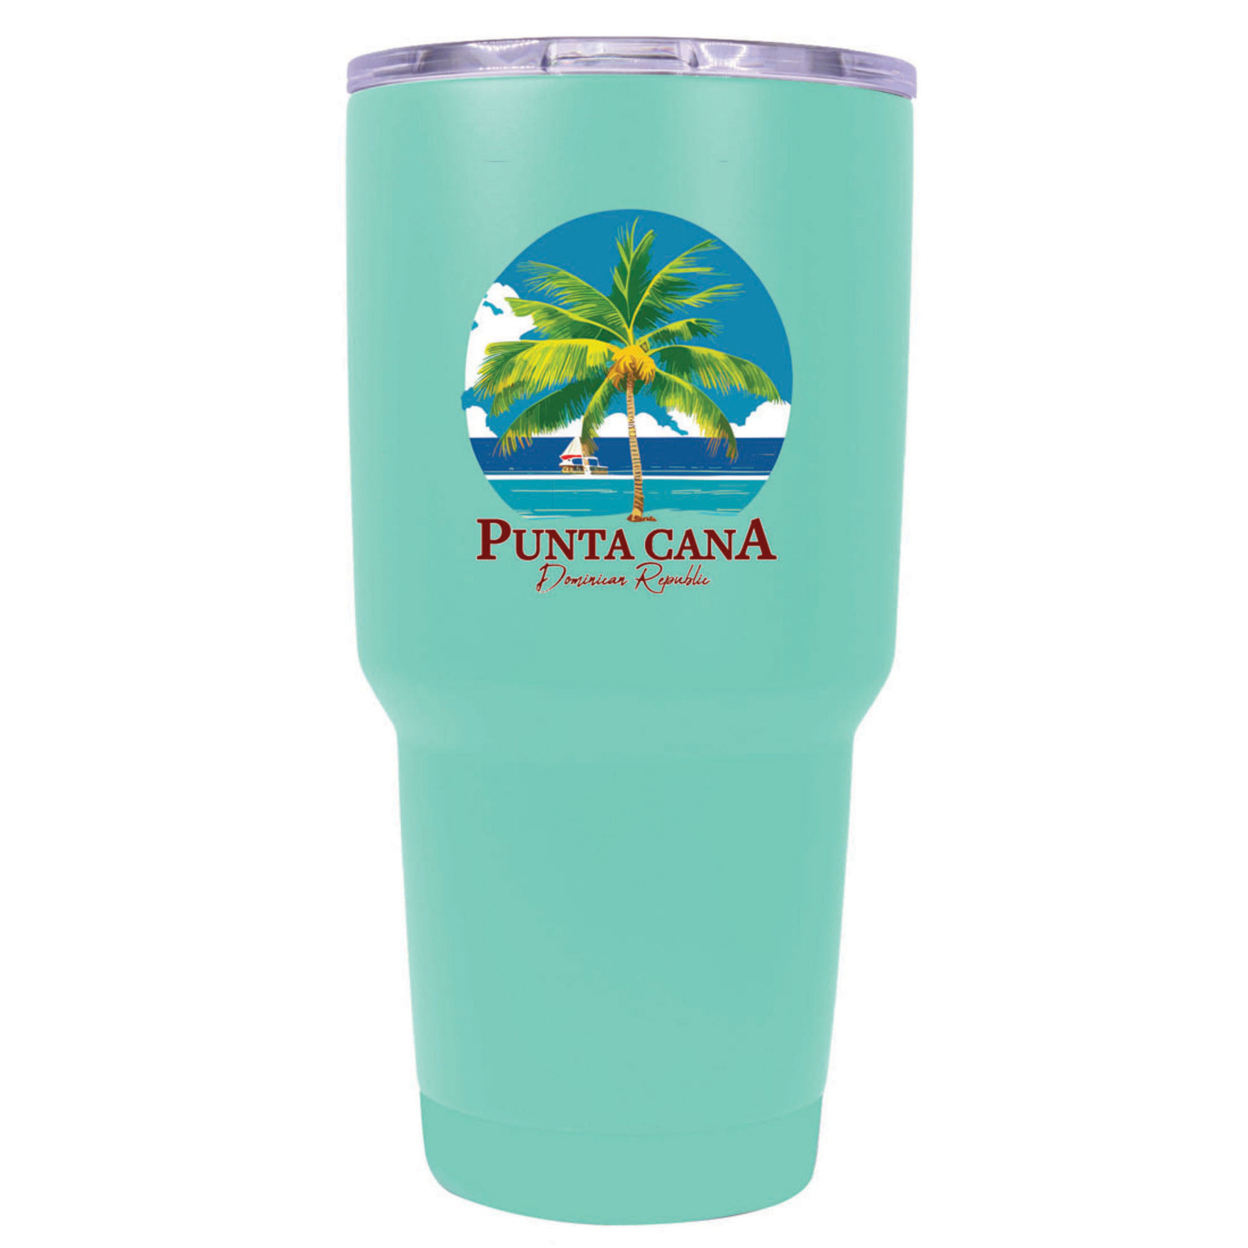 Punta Cana Dominican Republic Souvenir 24 Oz Insulated Stainless Steel Tumbler - Black, PALM